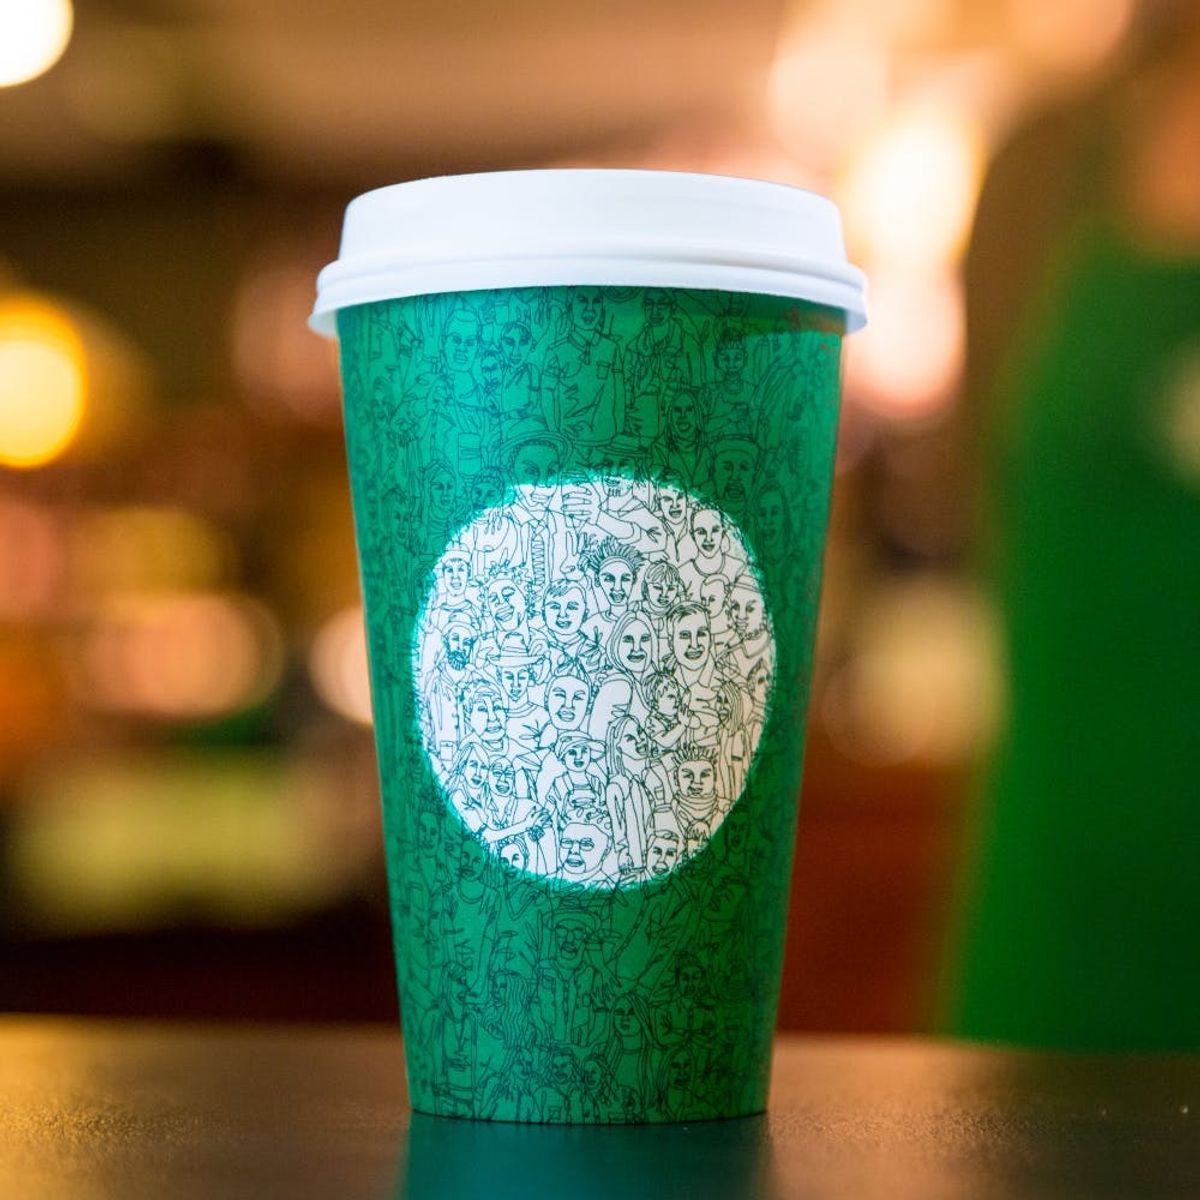 People Are HATING on Starbucks New Green Cup Design